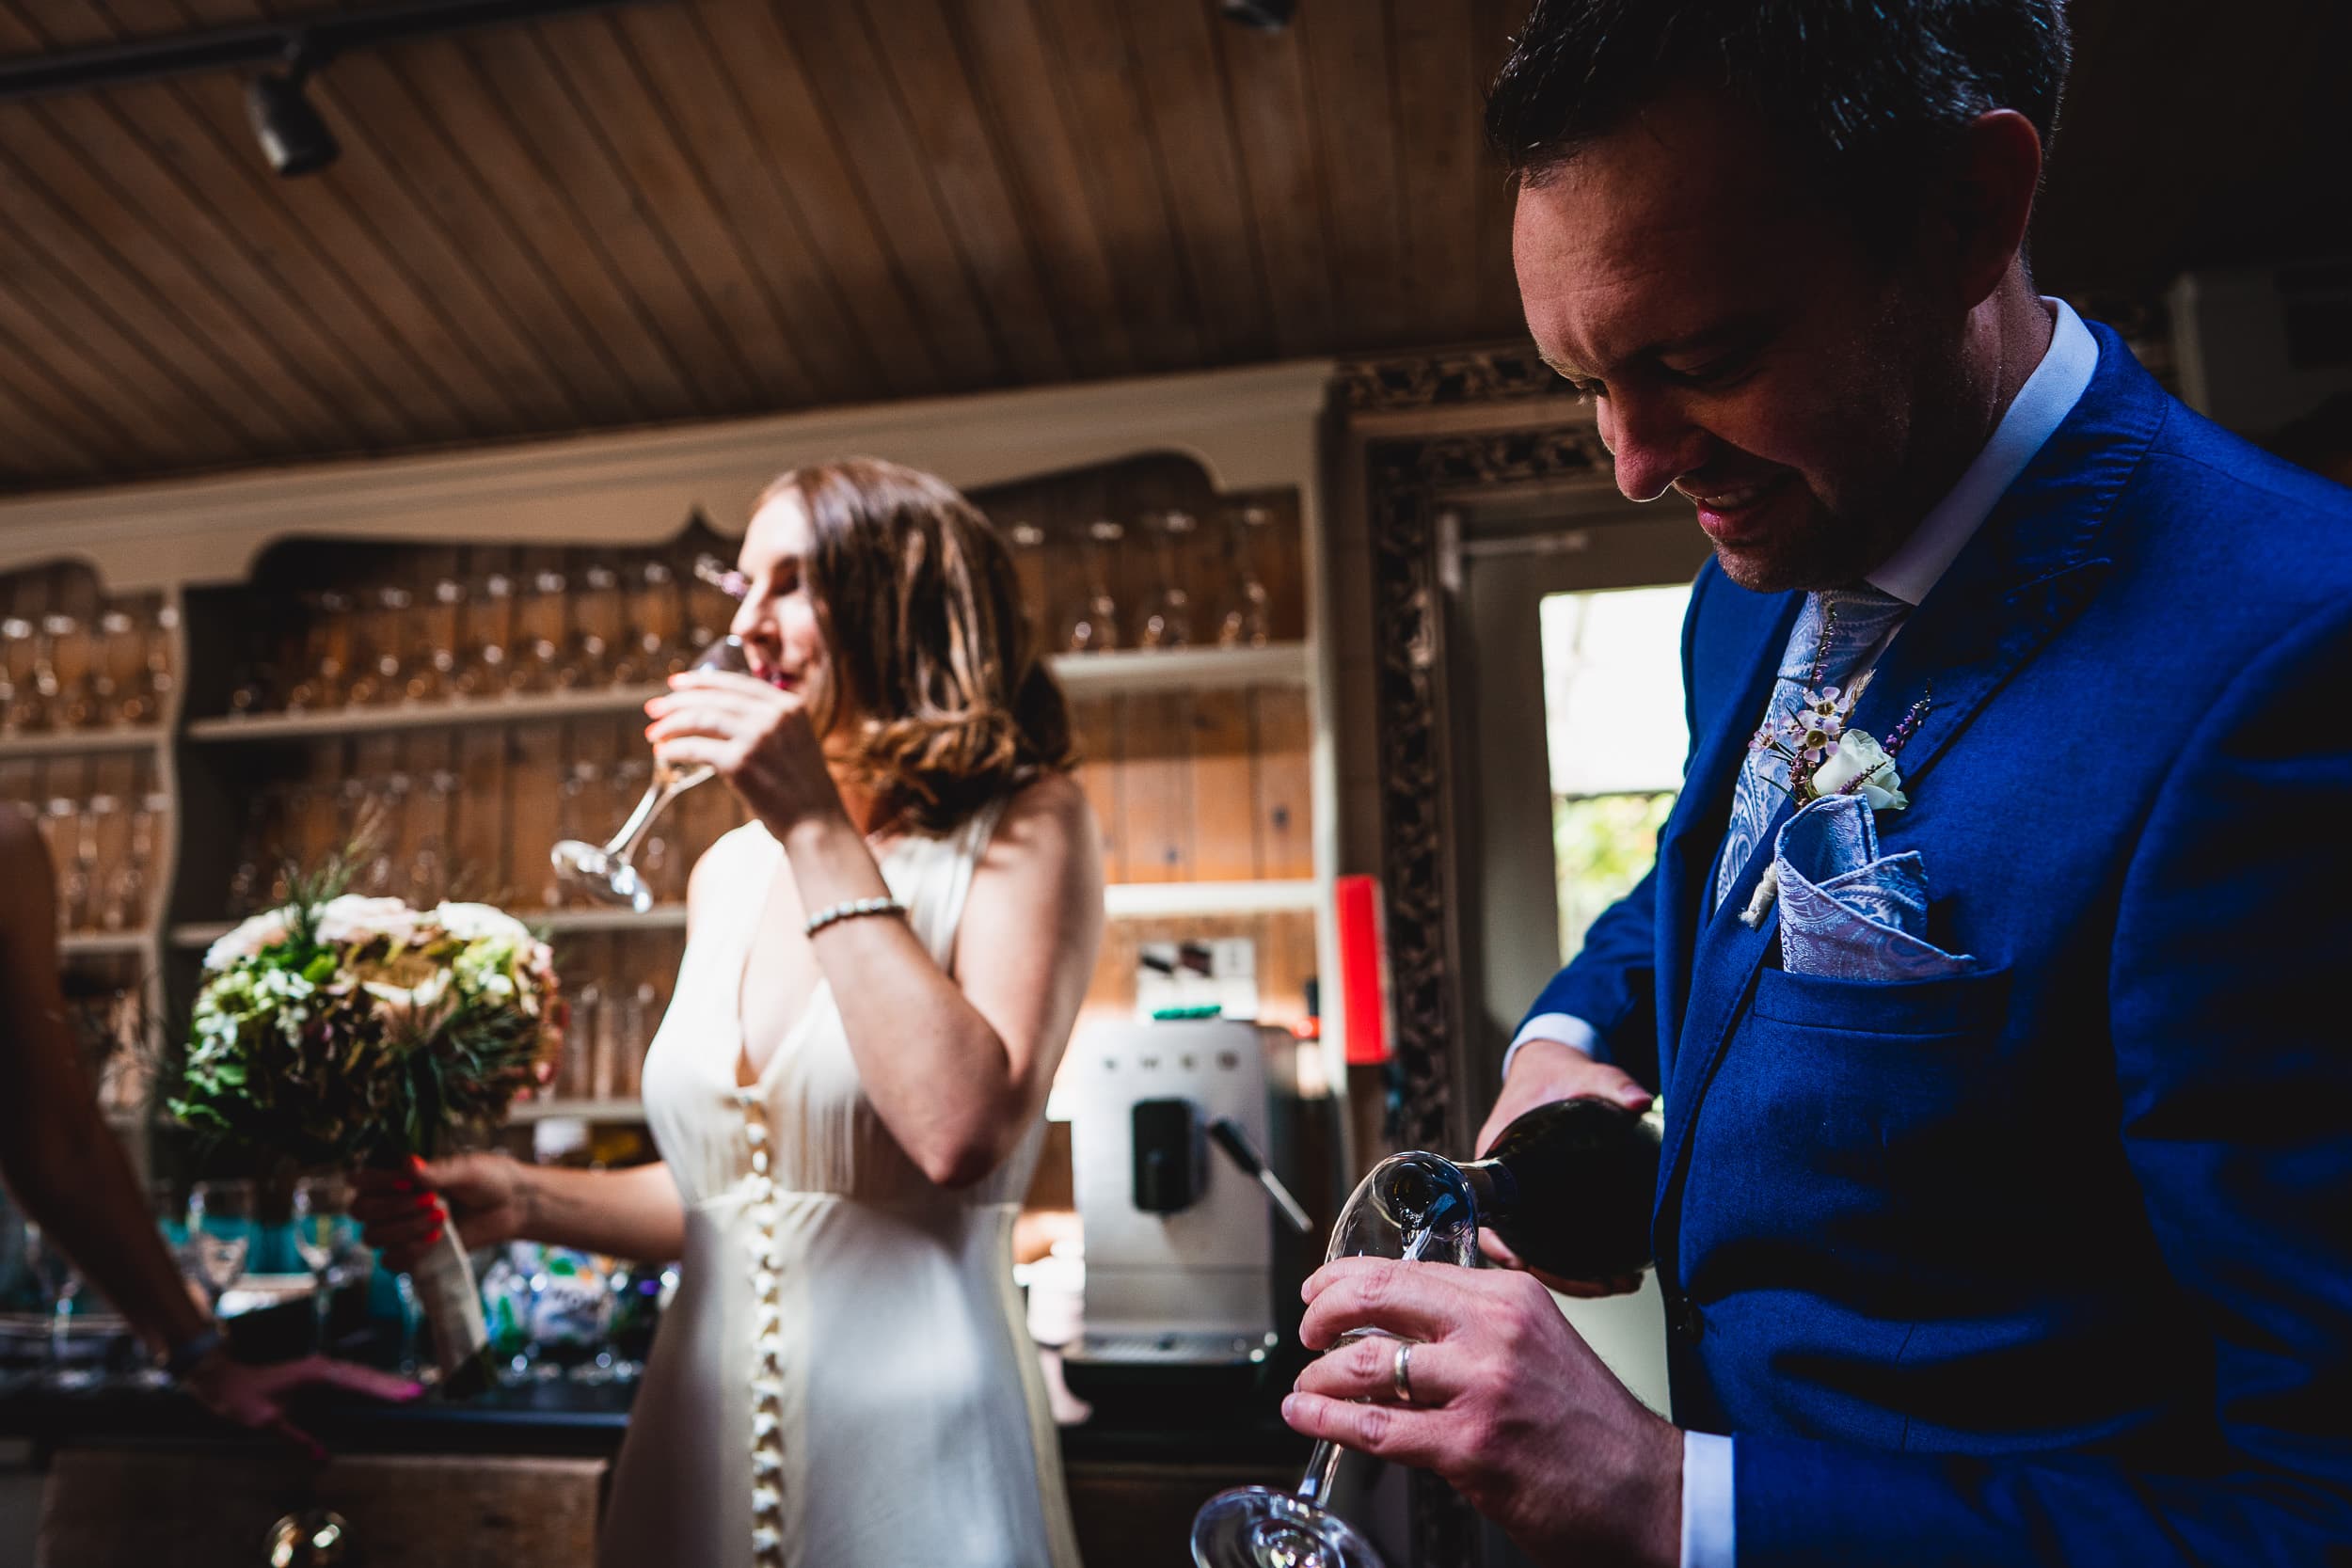 A Surrey wedding at Ridge Farm is captured in this delightful image of a bride and groom pouring wine in a bar.